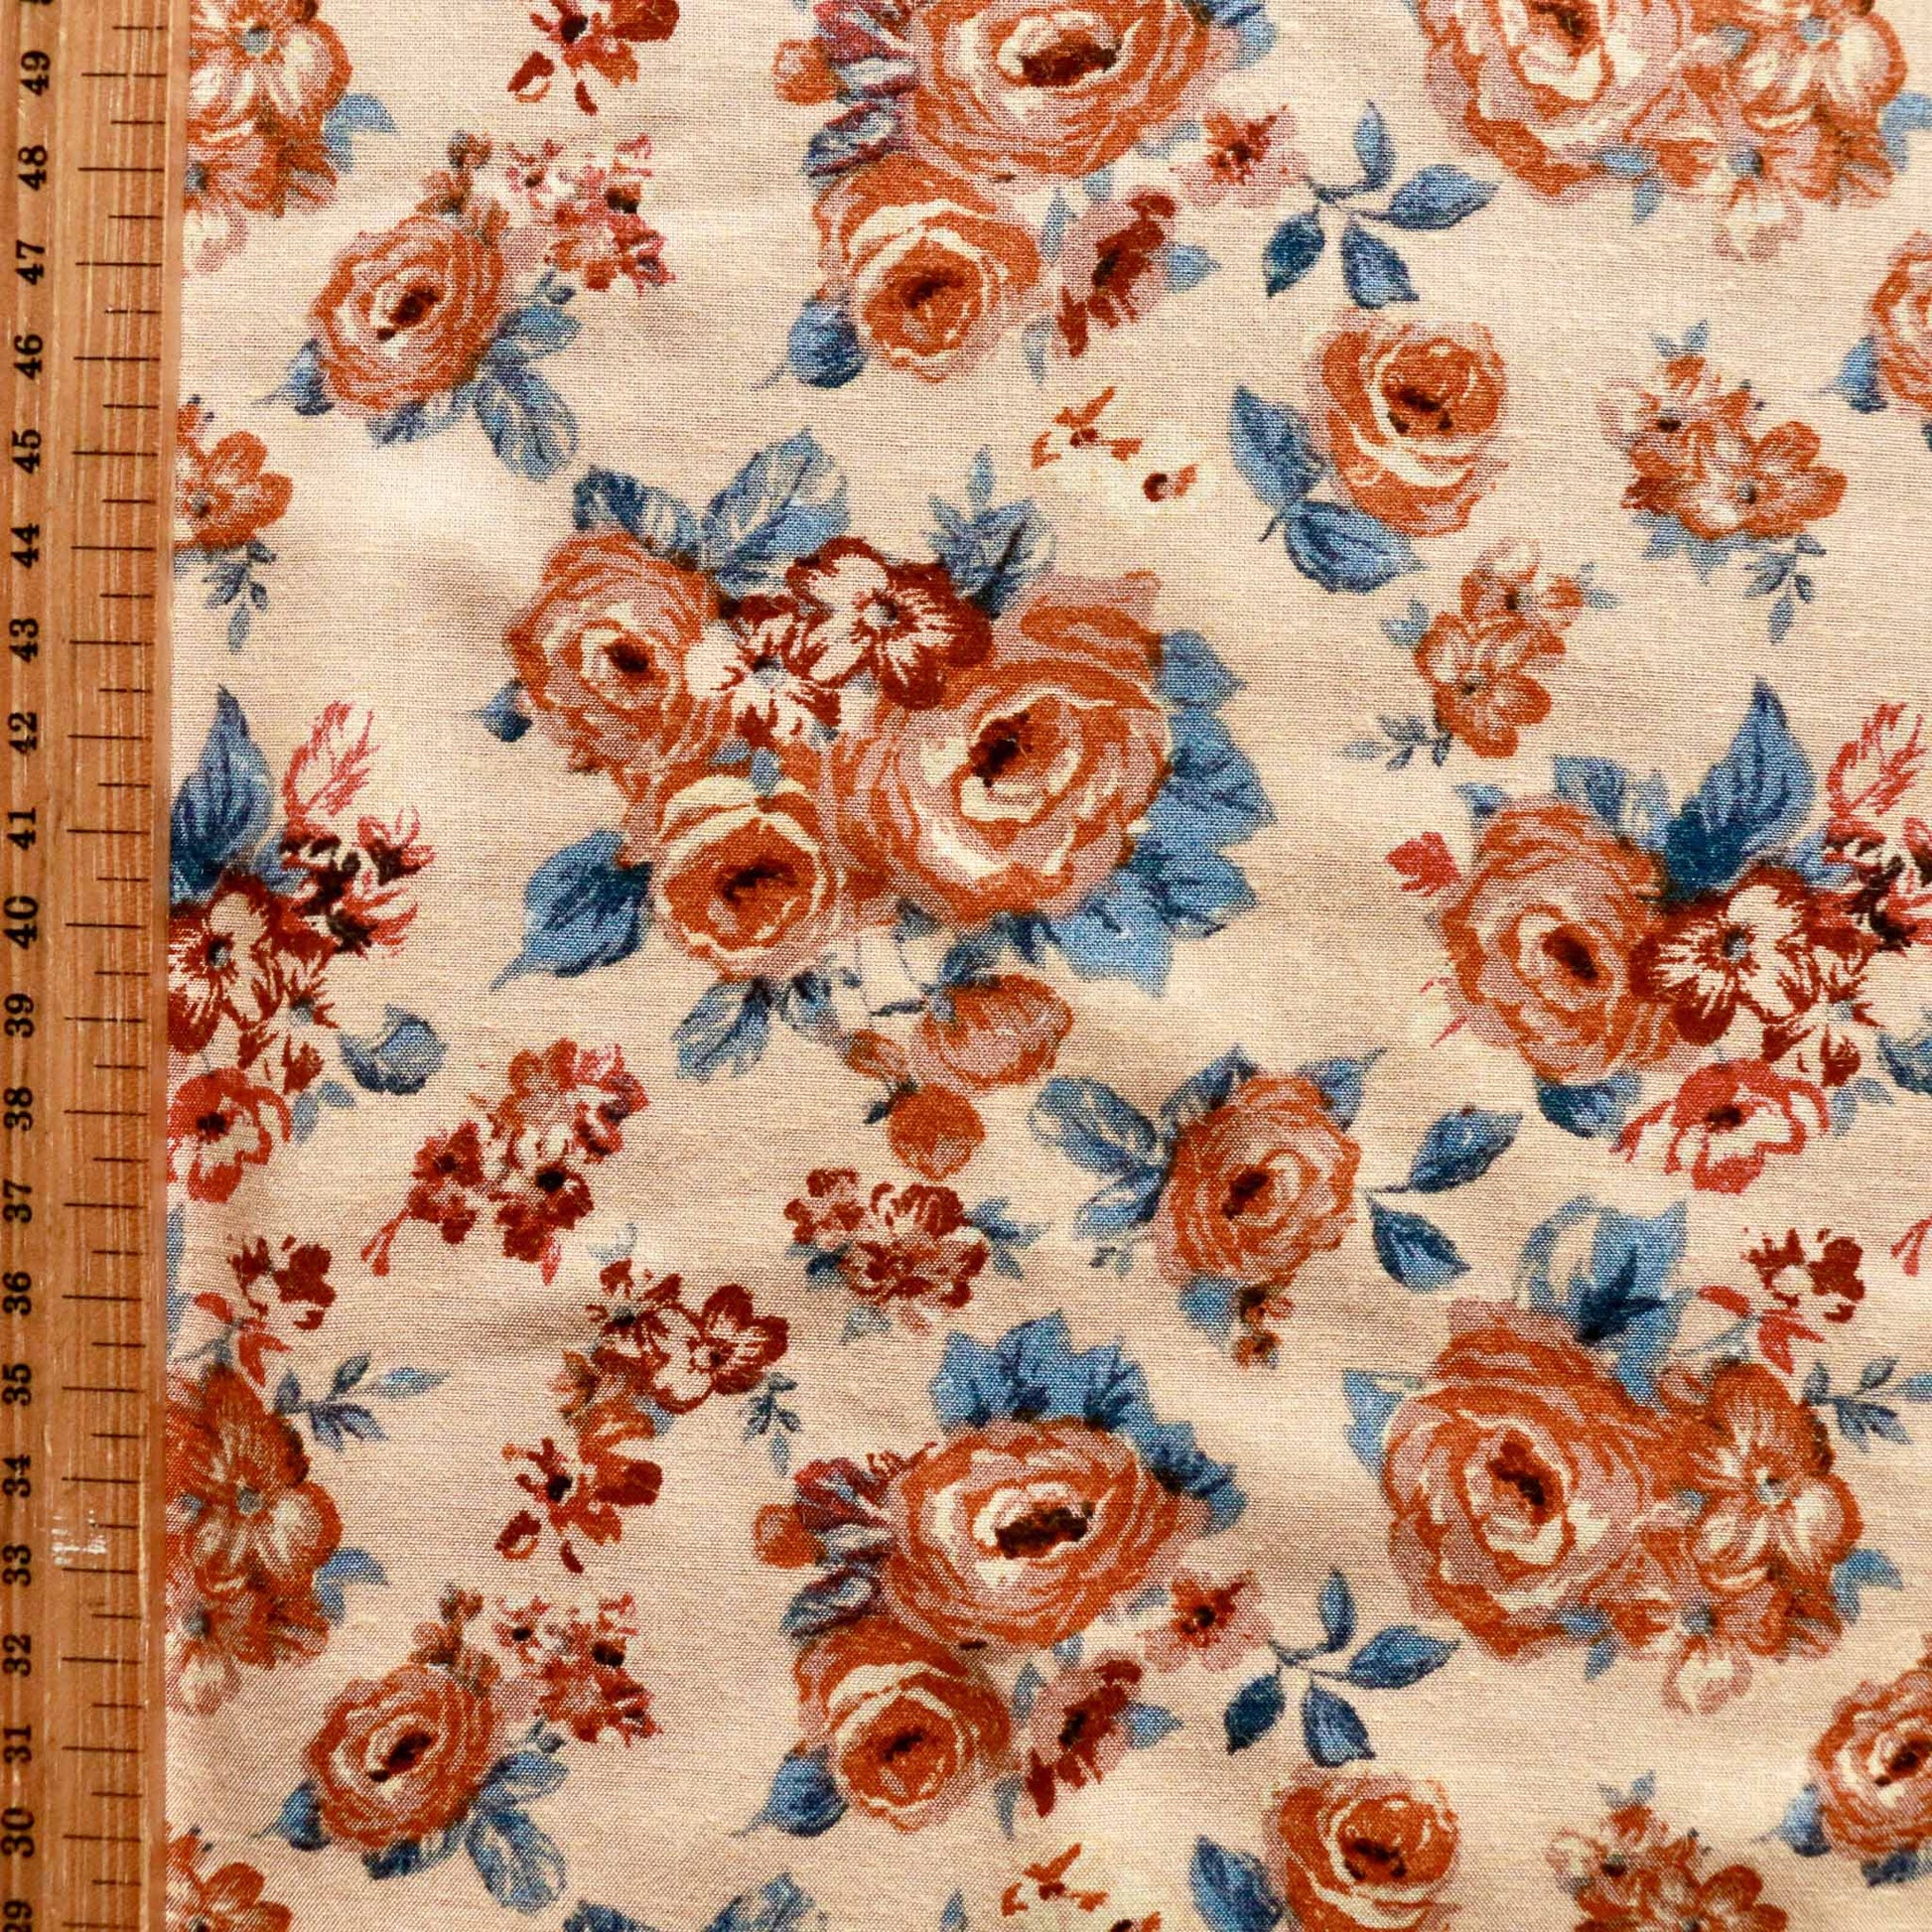 metre beige light brown viscose challis dressmaking fabric with classic floral print in orange and blue